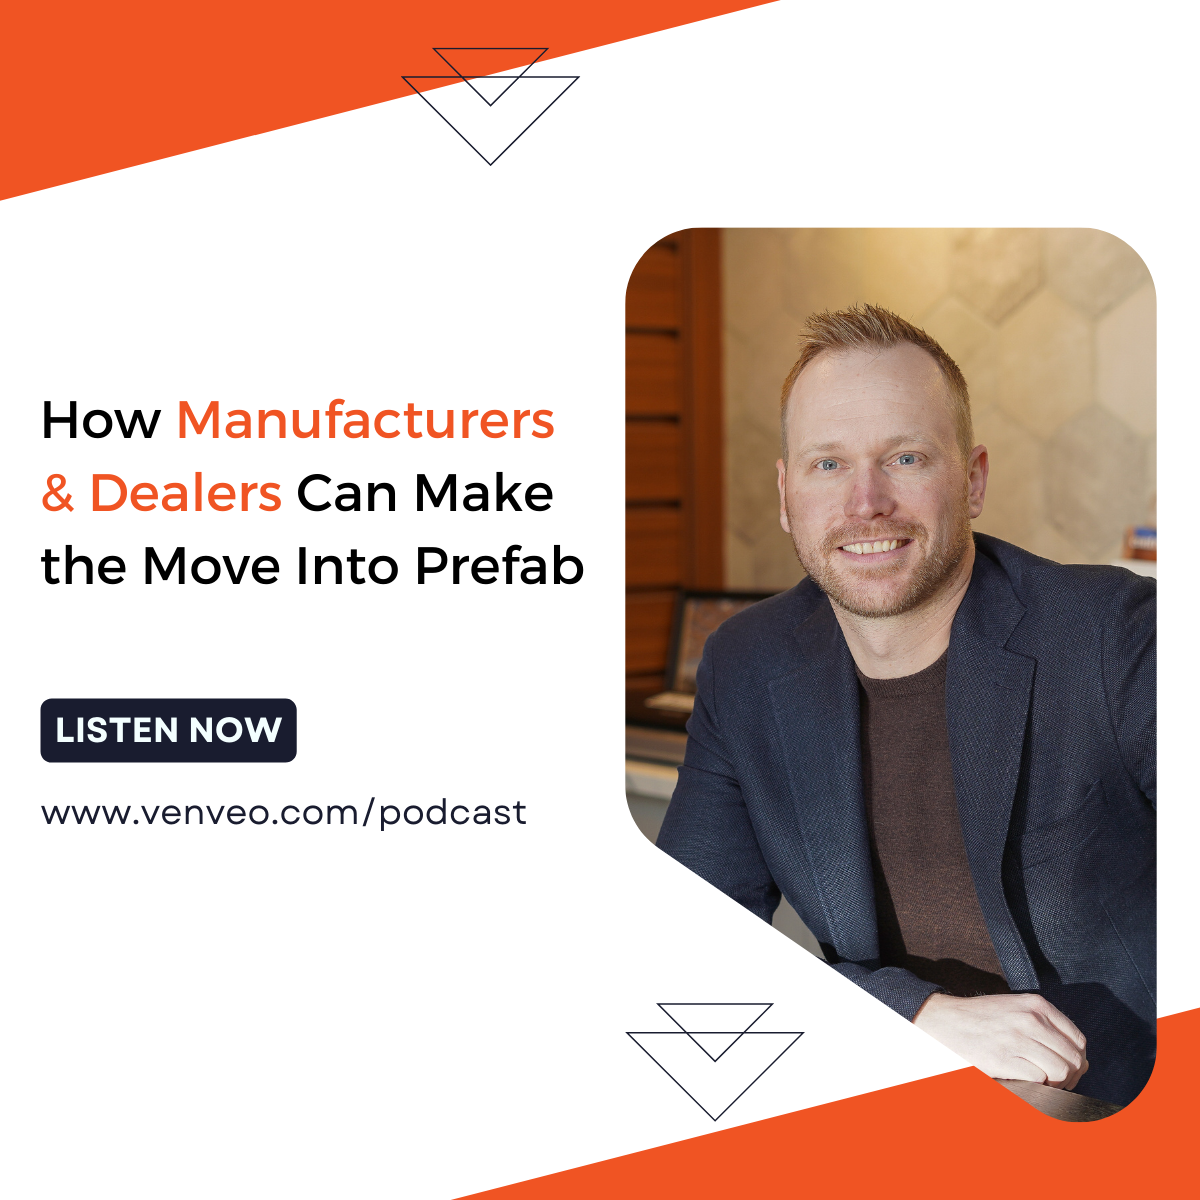 How Manufacturers & Dealers Can Make the Move Into Prefab